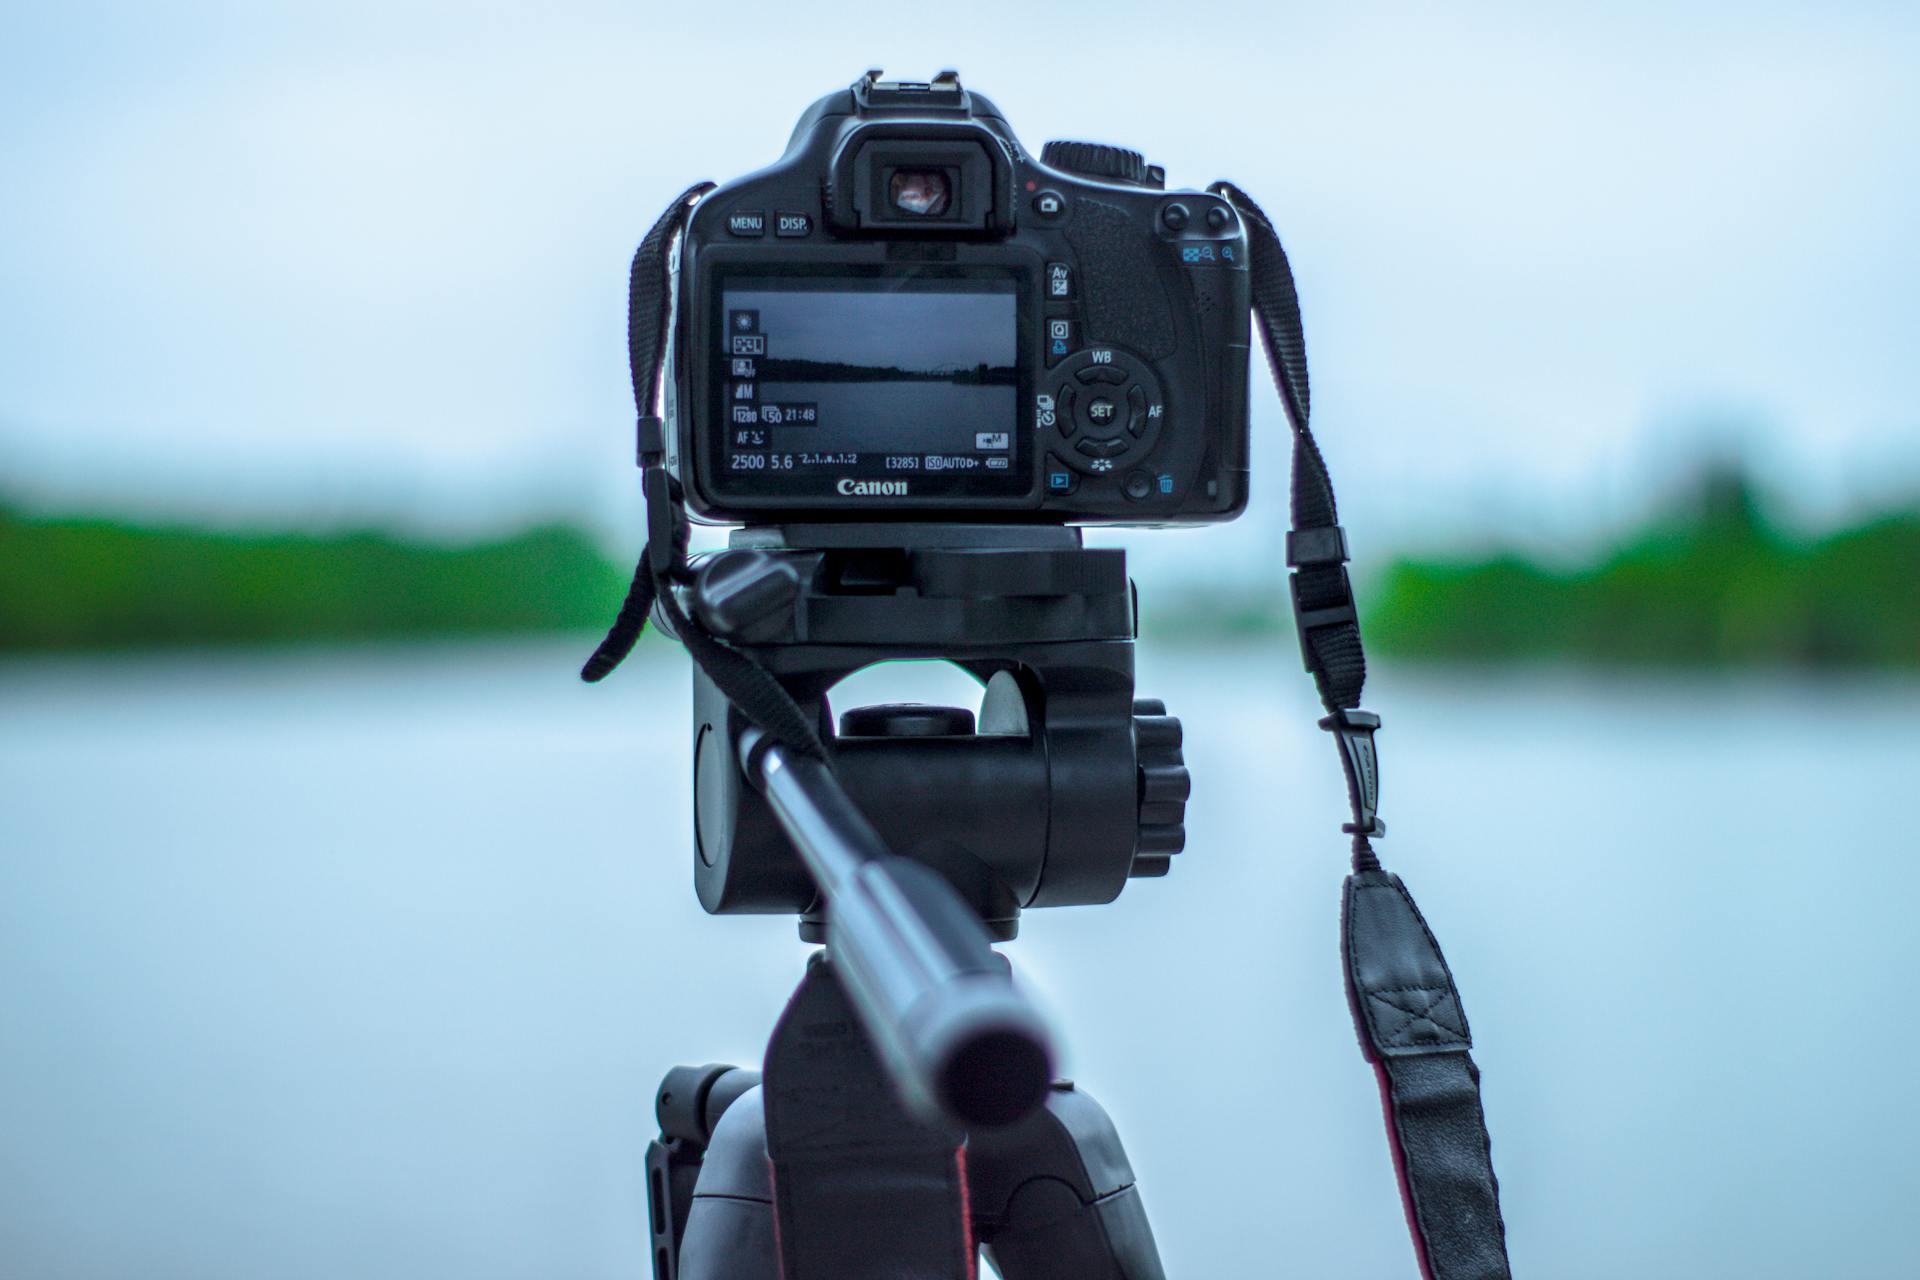 Selective Focus Photo of Black Canon Camera on Tripod Stand in Front of Body of Water Photo